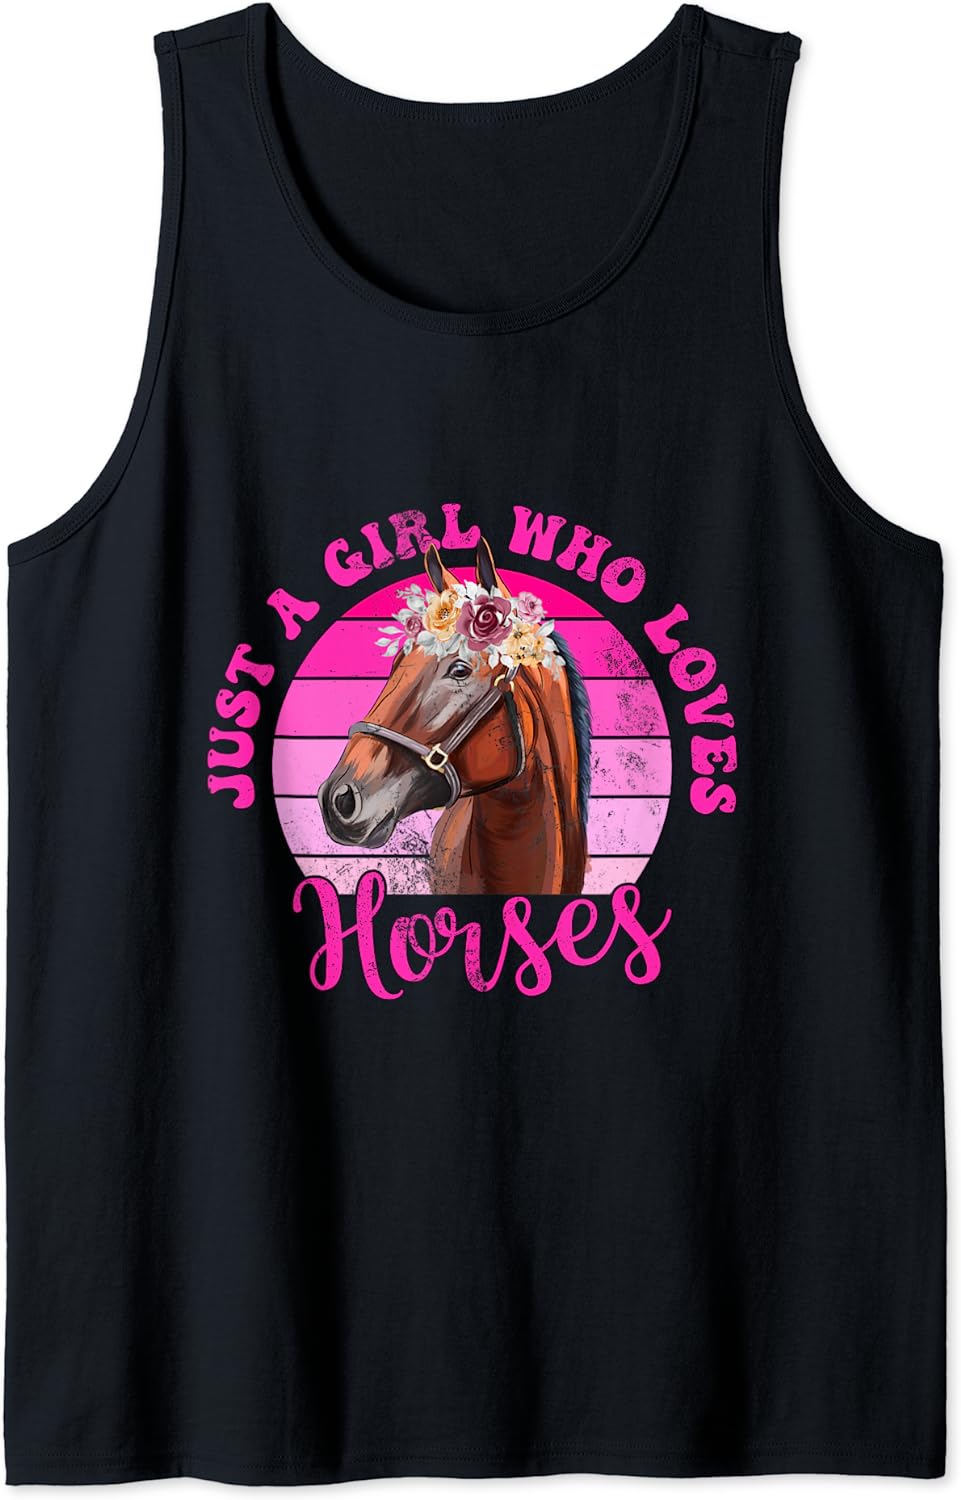 Just A Girl Who Loves Horses - Riding Girl Equestrian Lover Tank Top Best Price